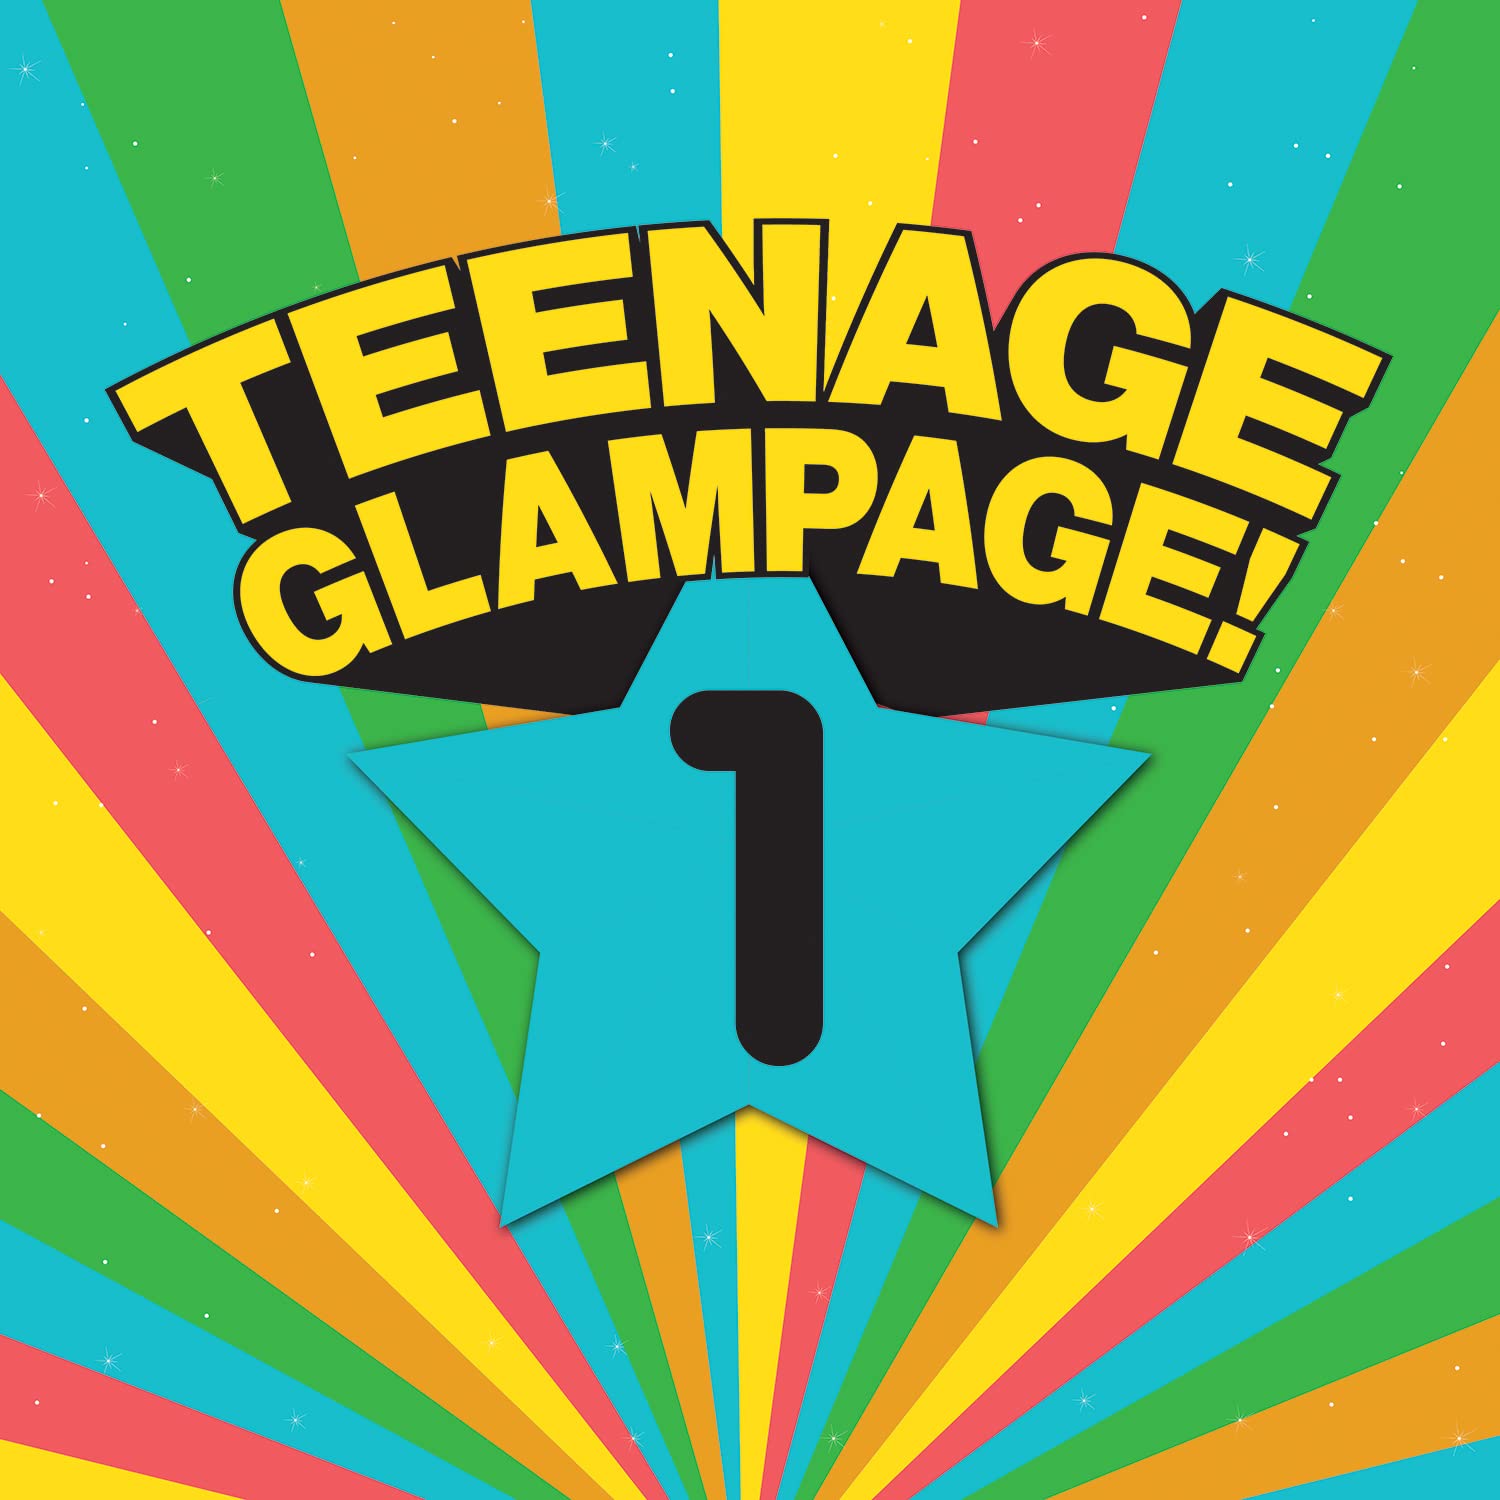 Various Artists – Can the Glam! 2 – Teenage Glampage! 80 Glambusters (2022) MP3 320kbps